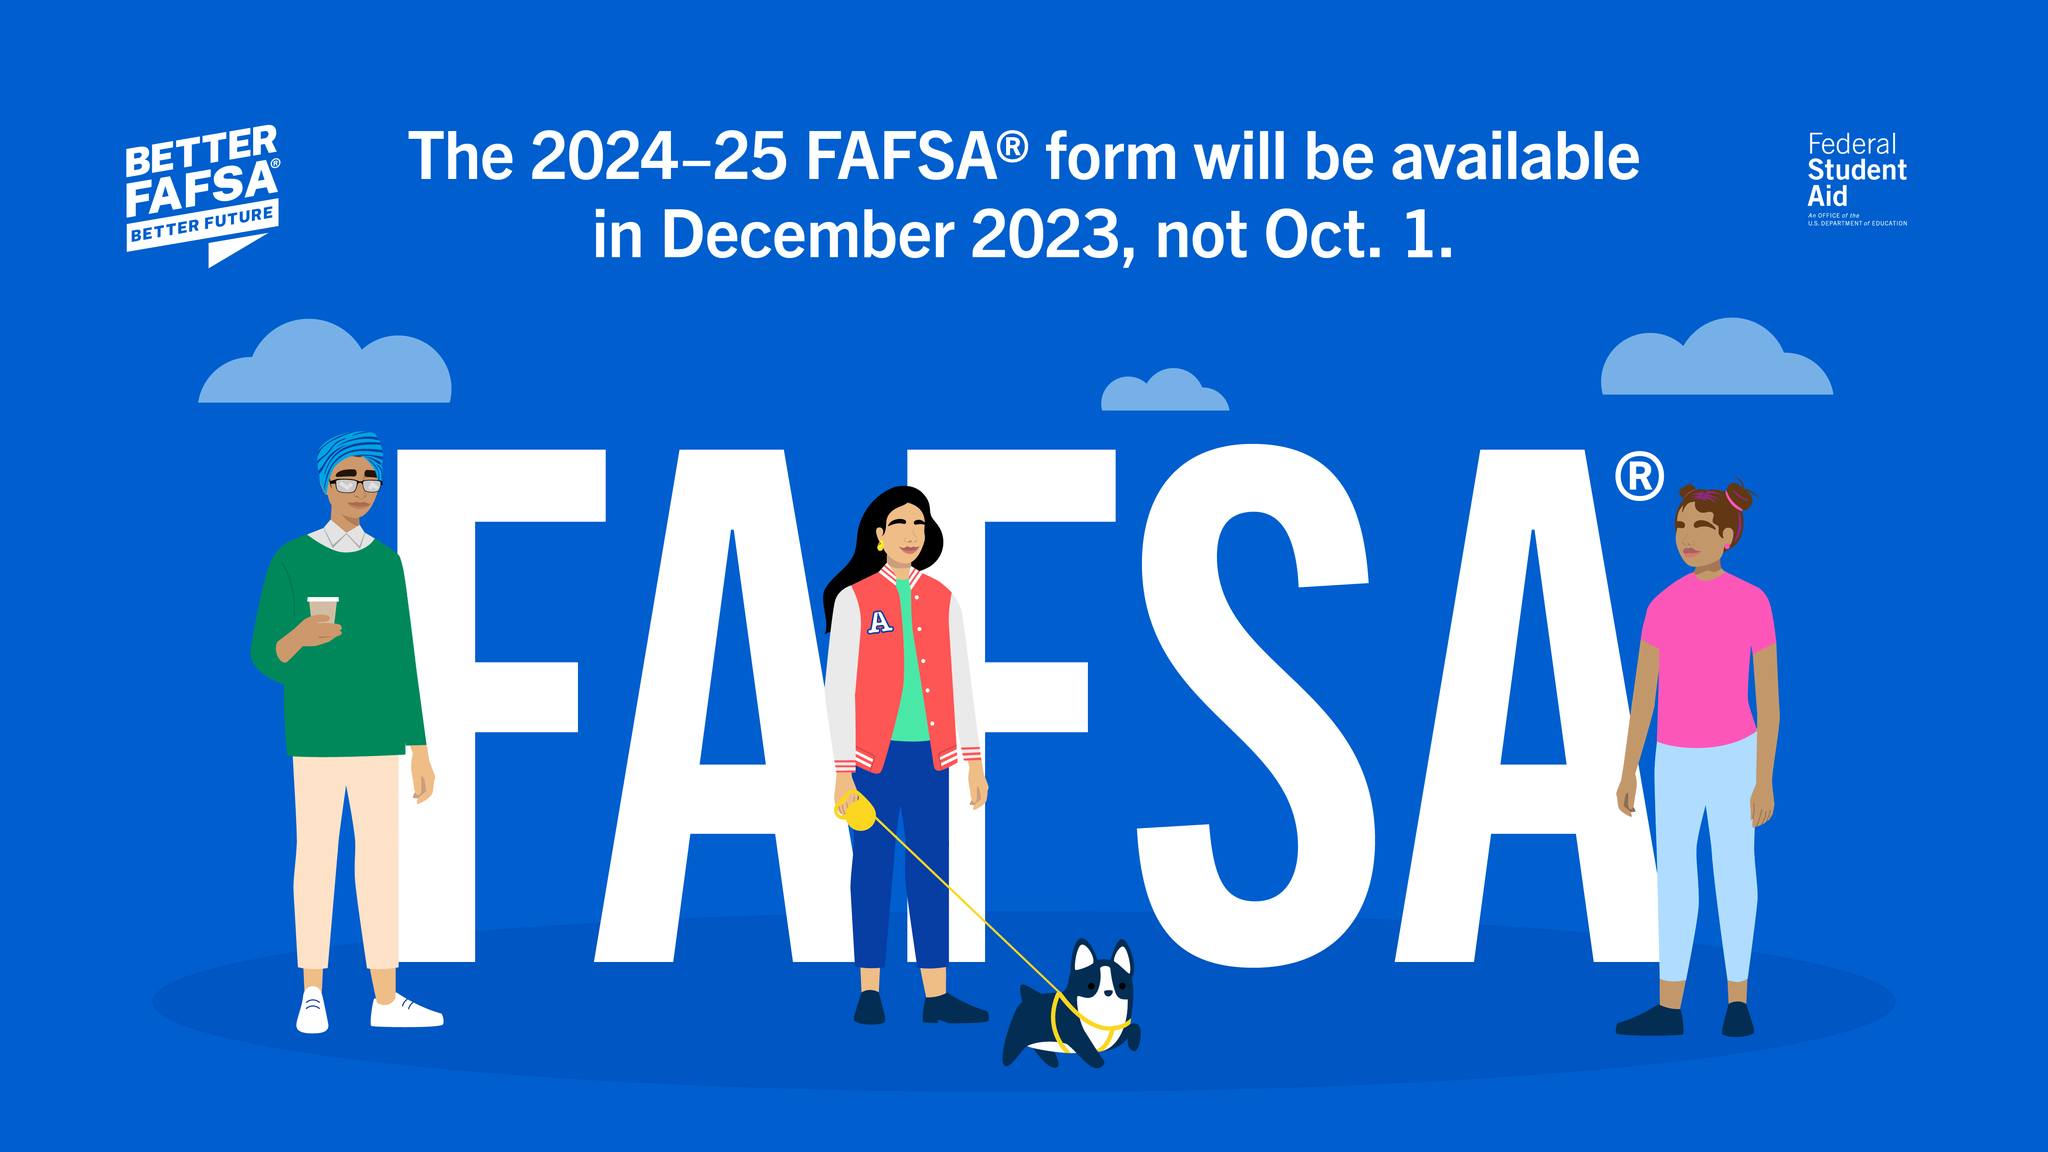 The 2024-25 FAFSA form will be available in December 2023, not October 1.